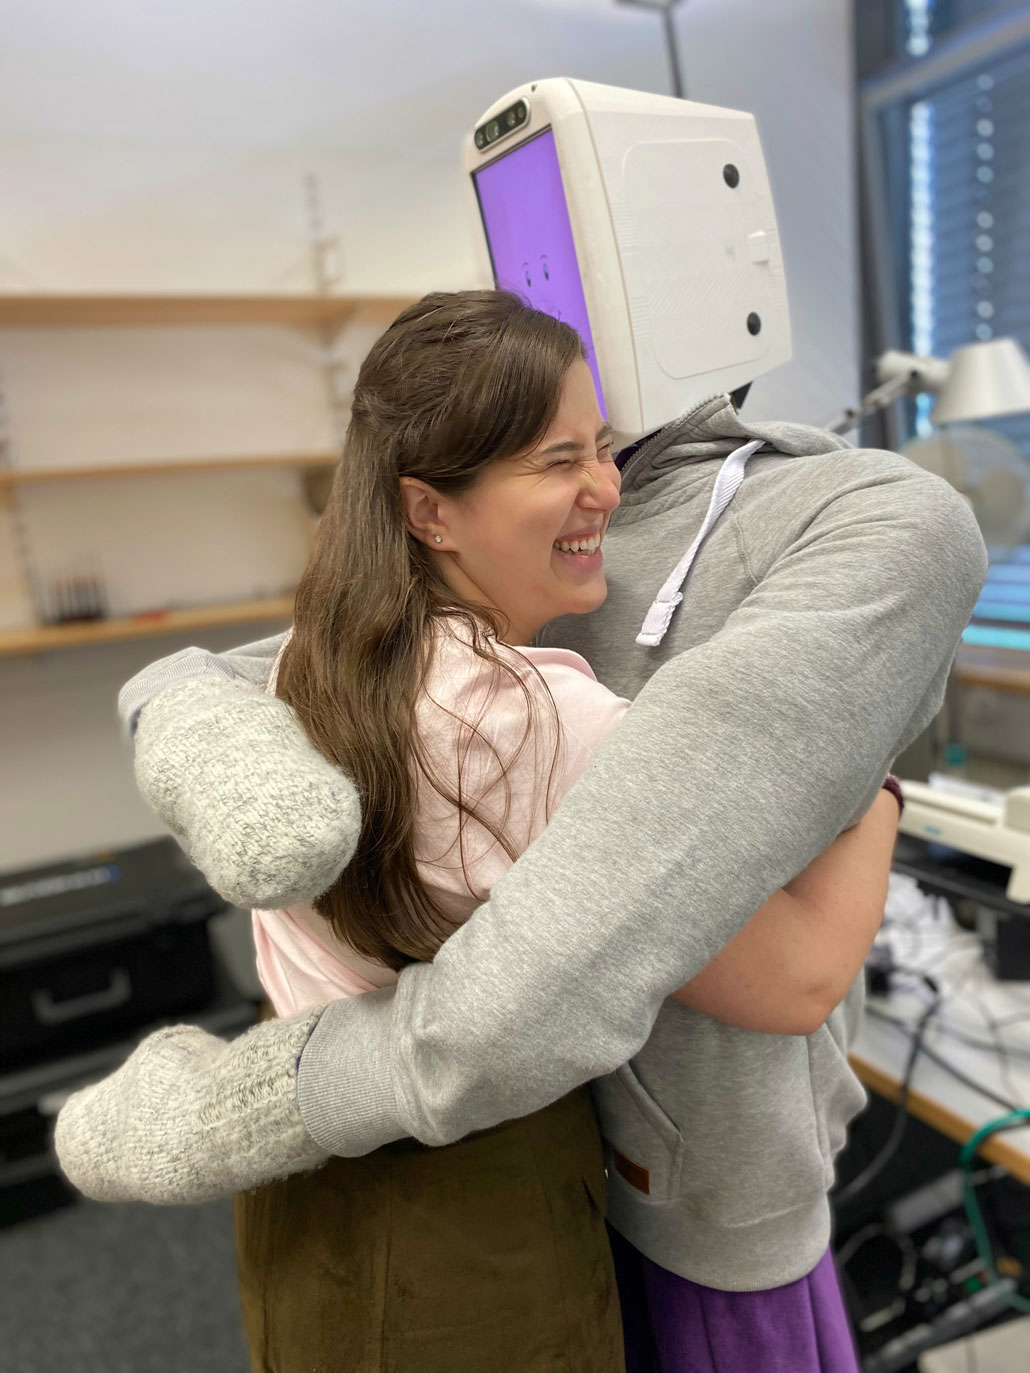 A white woman with long brown hair is smiling and hugging a soft-armed robot. The robot's screen-head is lit up purple with a smiling emoji face and it is hugging her back.